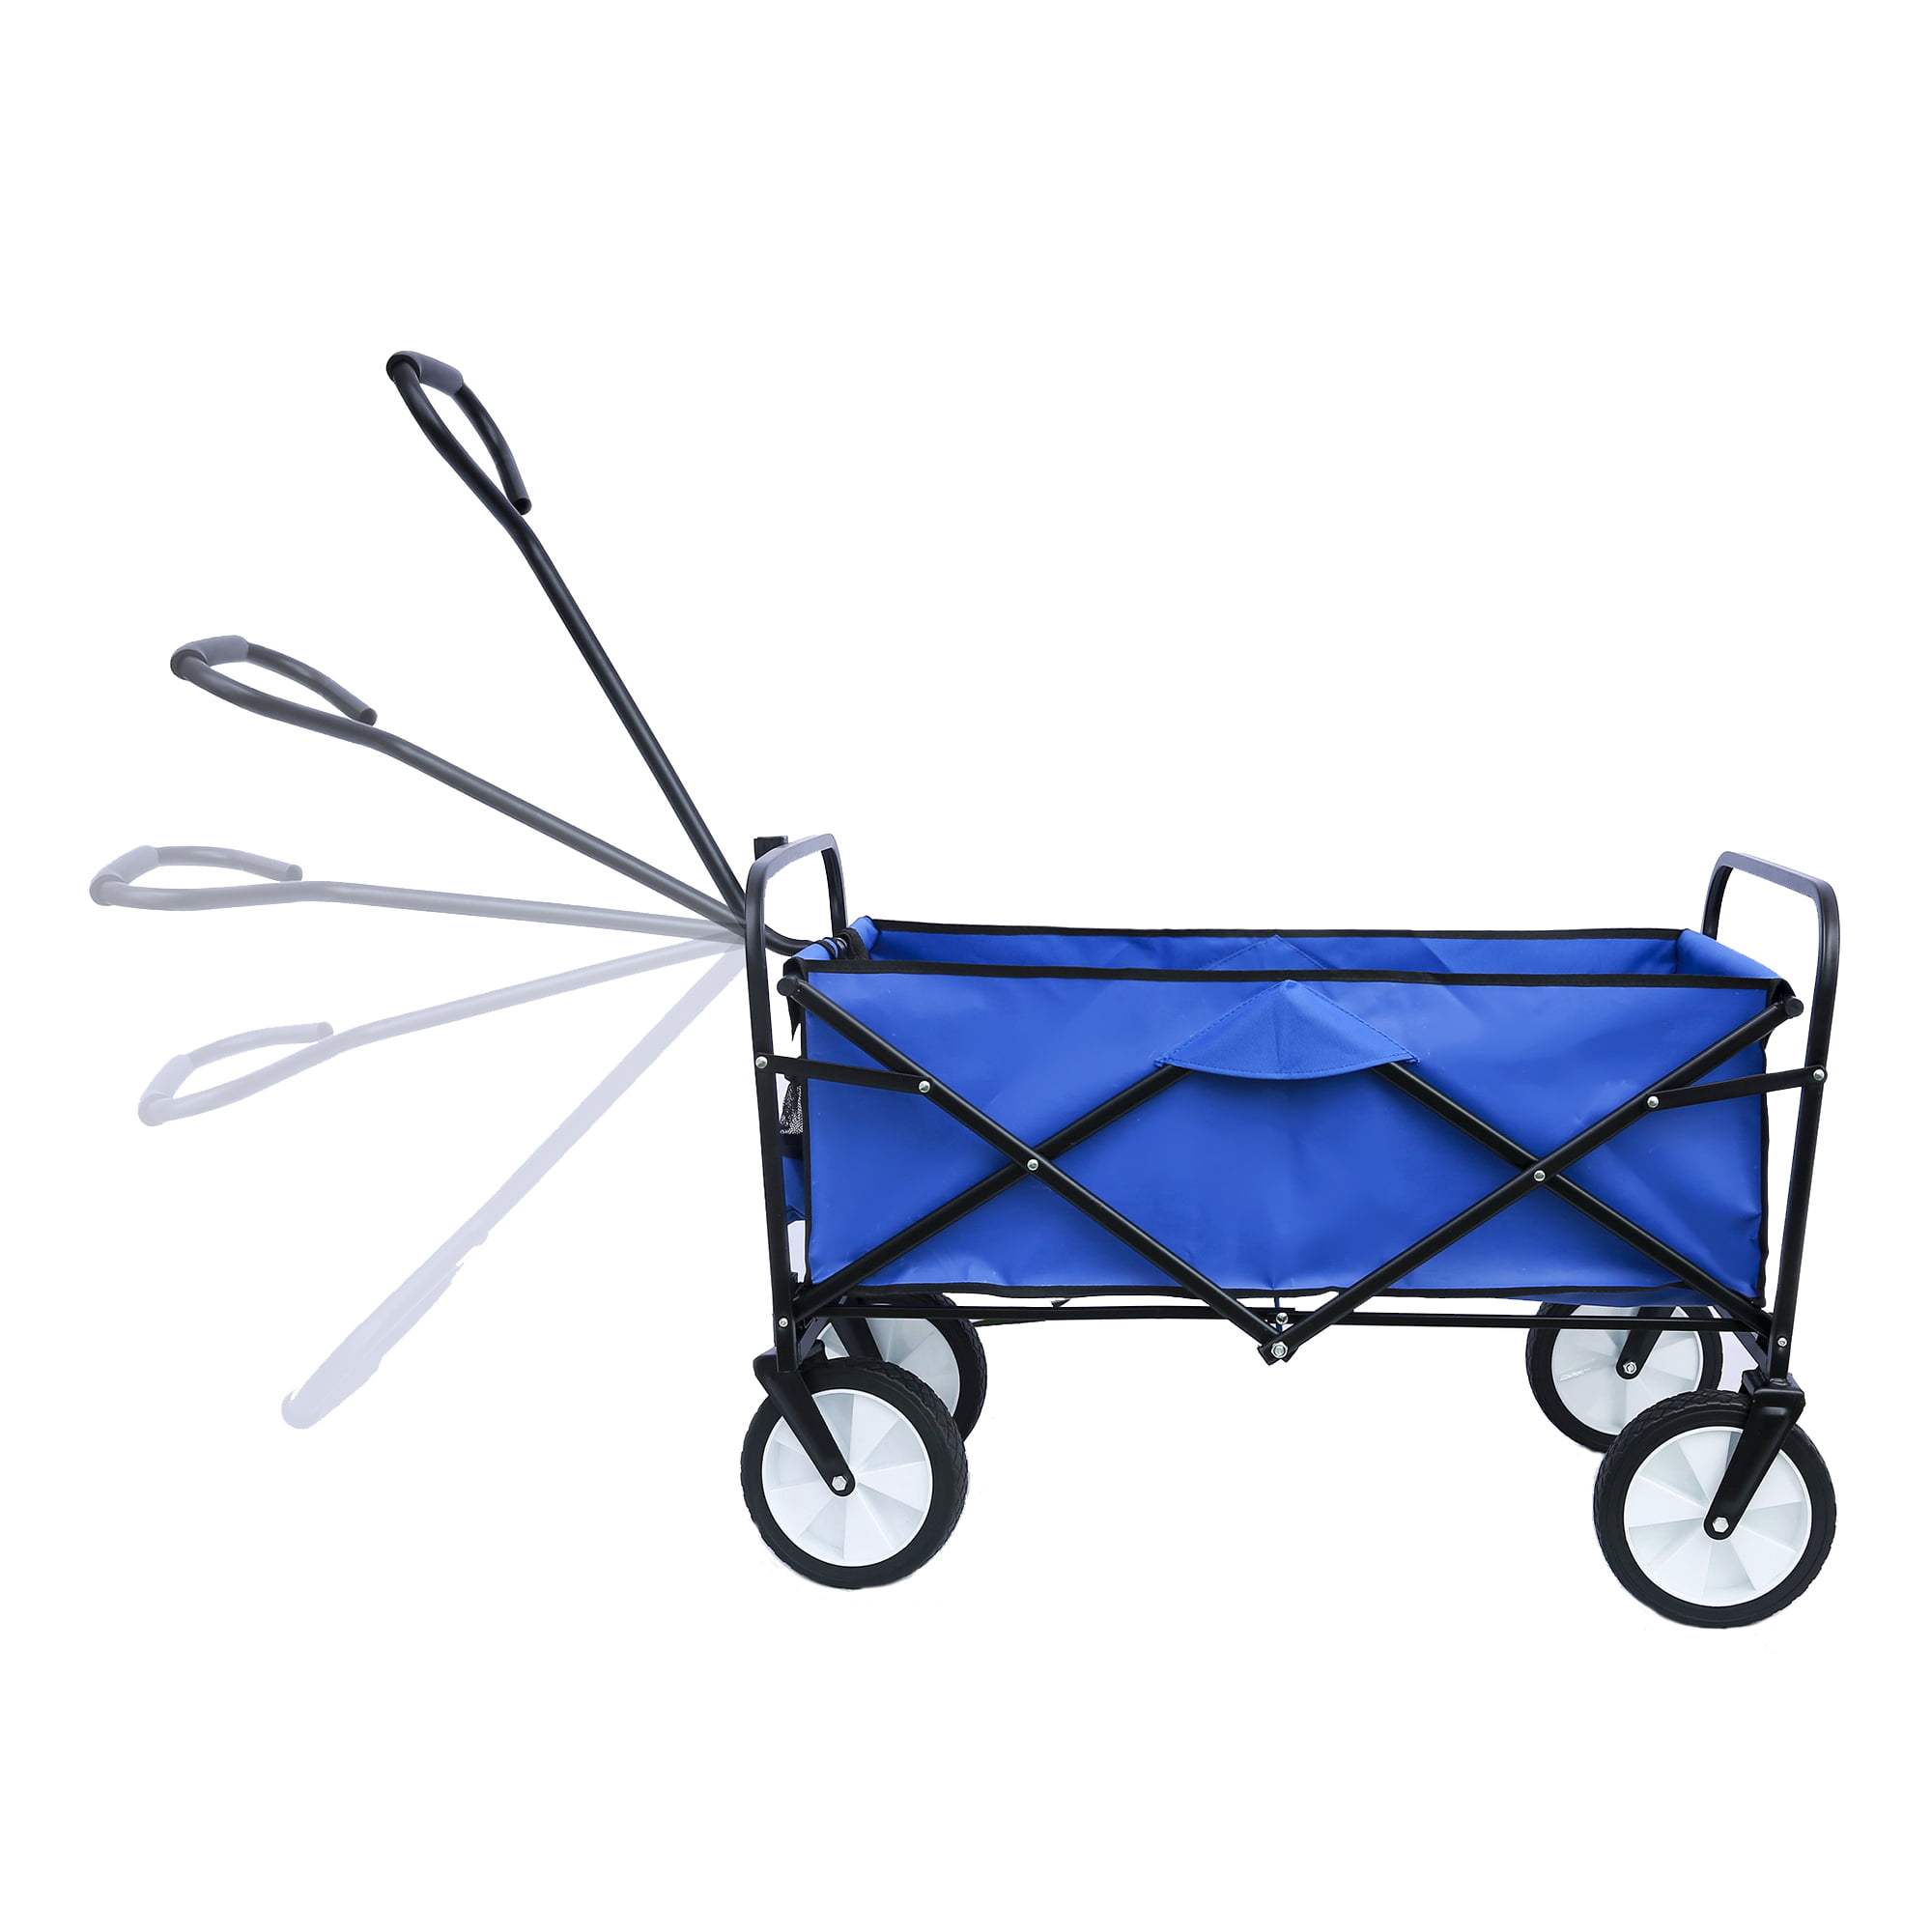 YWL-US Folding Collapsible Wagon Utility Outdoor Garden Shopping Camping Beach Cart with Adjustable Handle Blue 